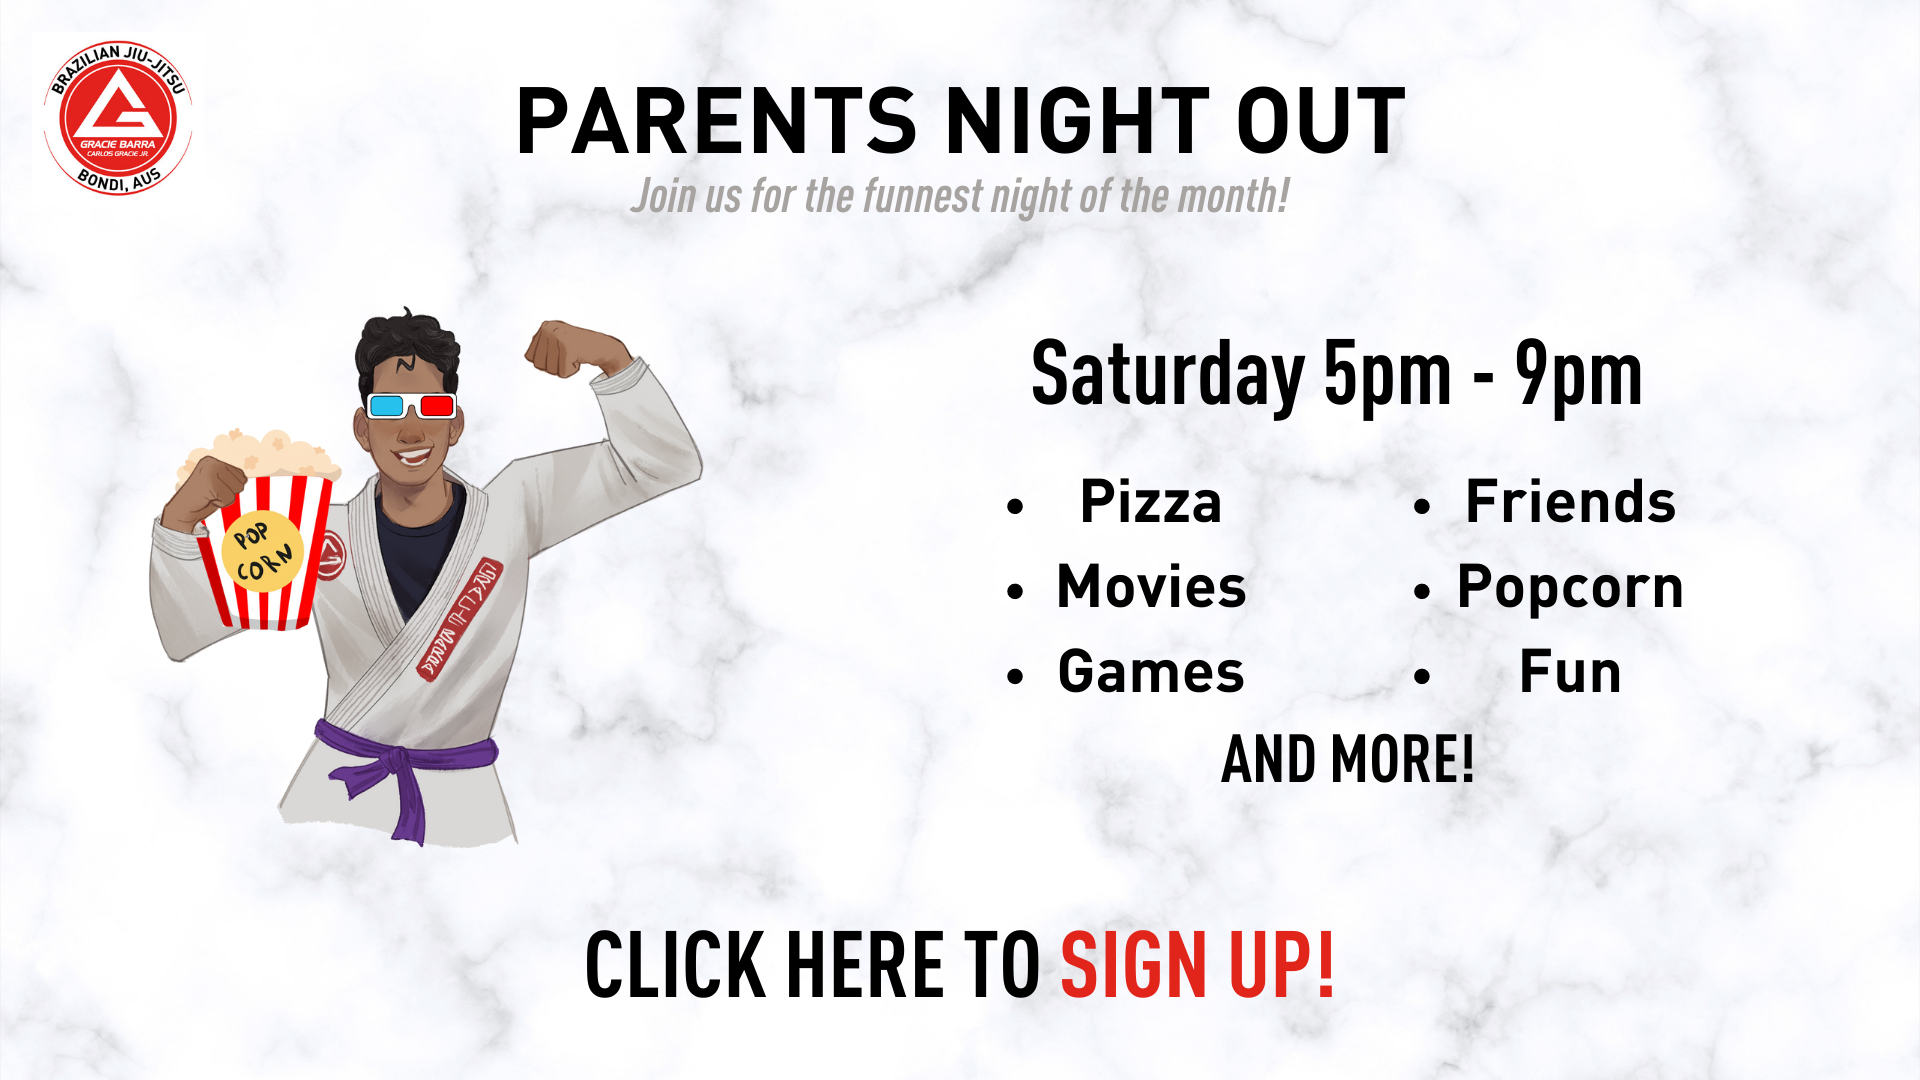 Join us for the most fun night of the month! Sign Up at https://form.jotform.co/90720240588860